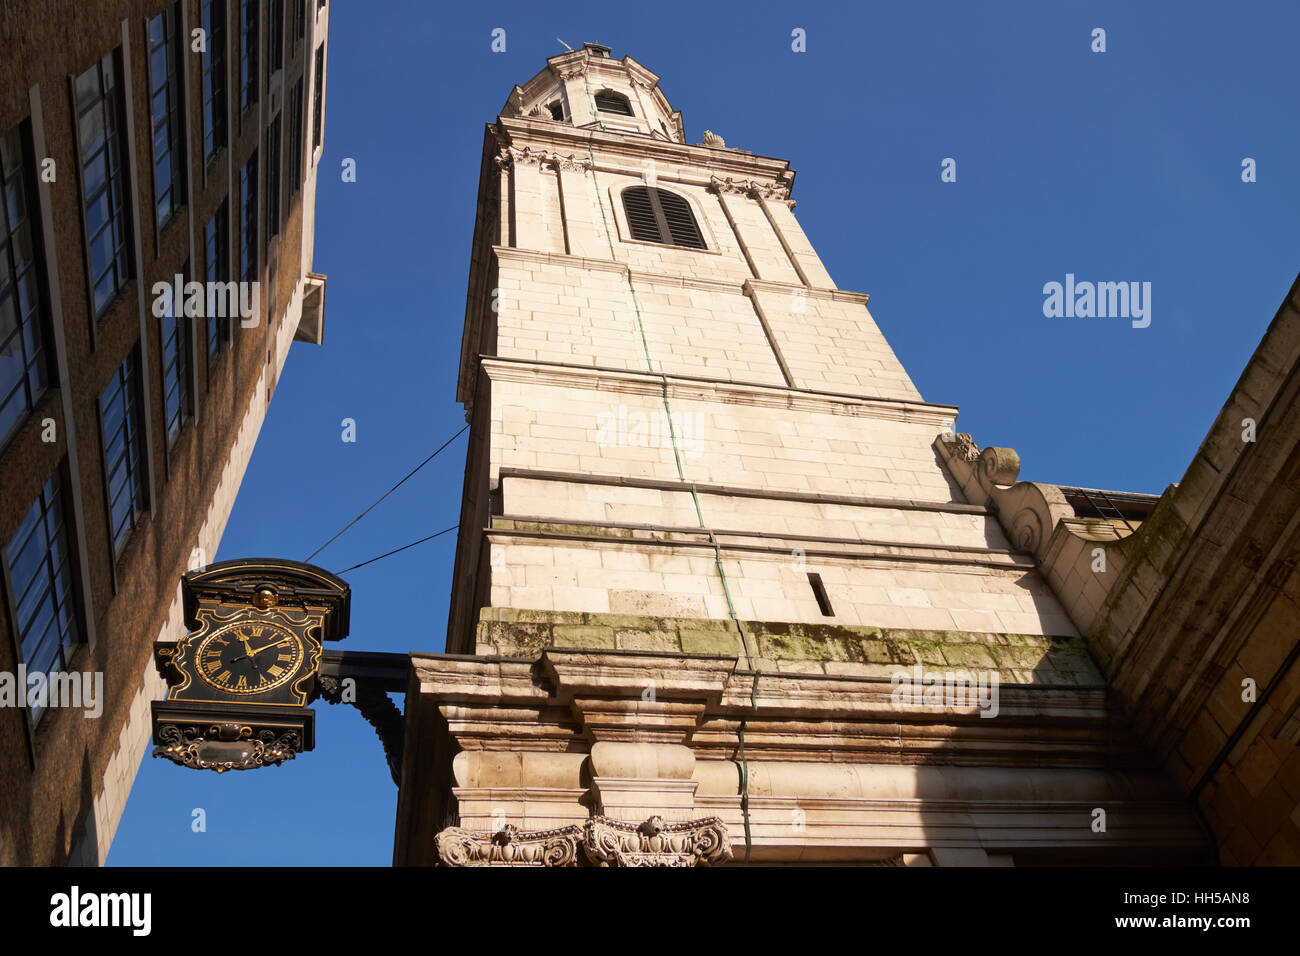 Tower and clock of St Magnus the Martyr church, Lower Thames St, London, UK. Stock Photo